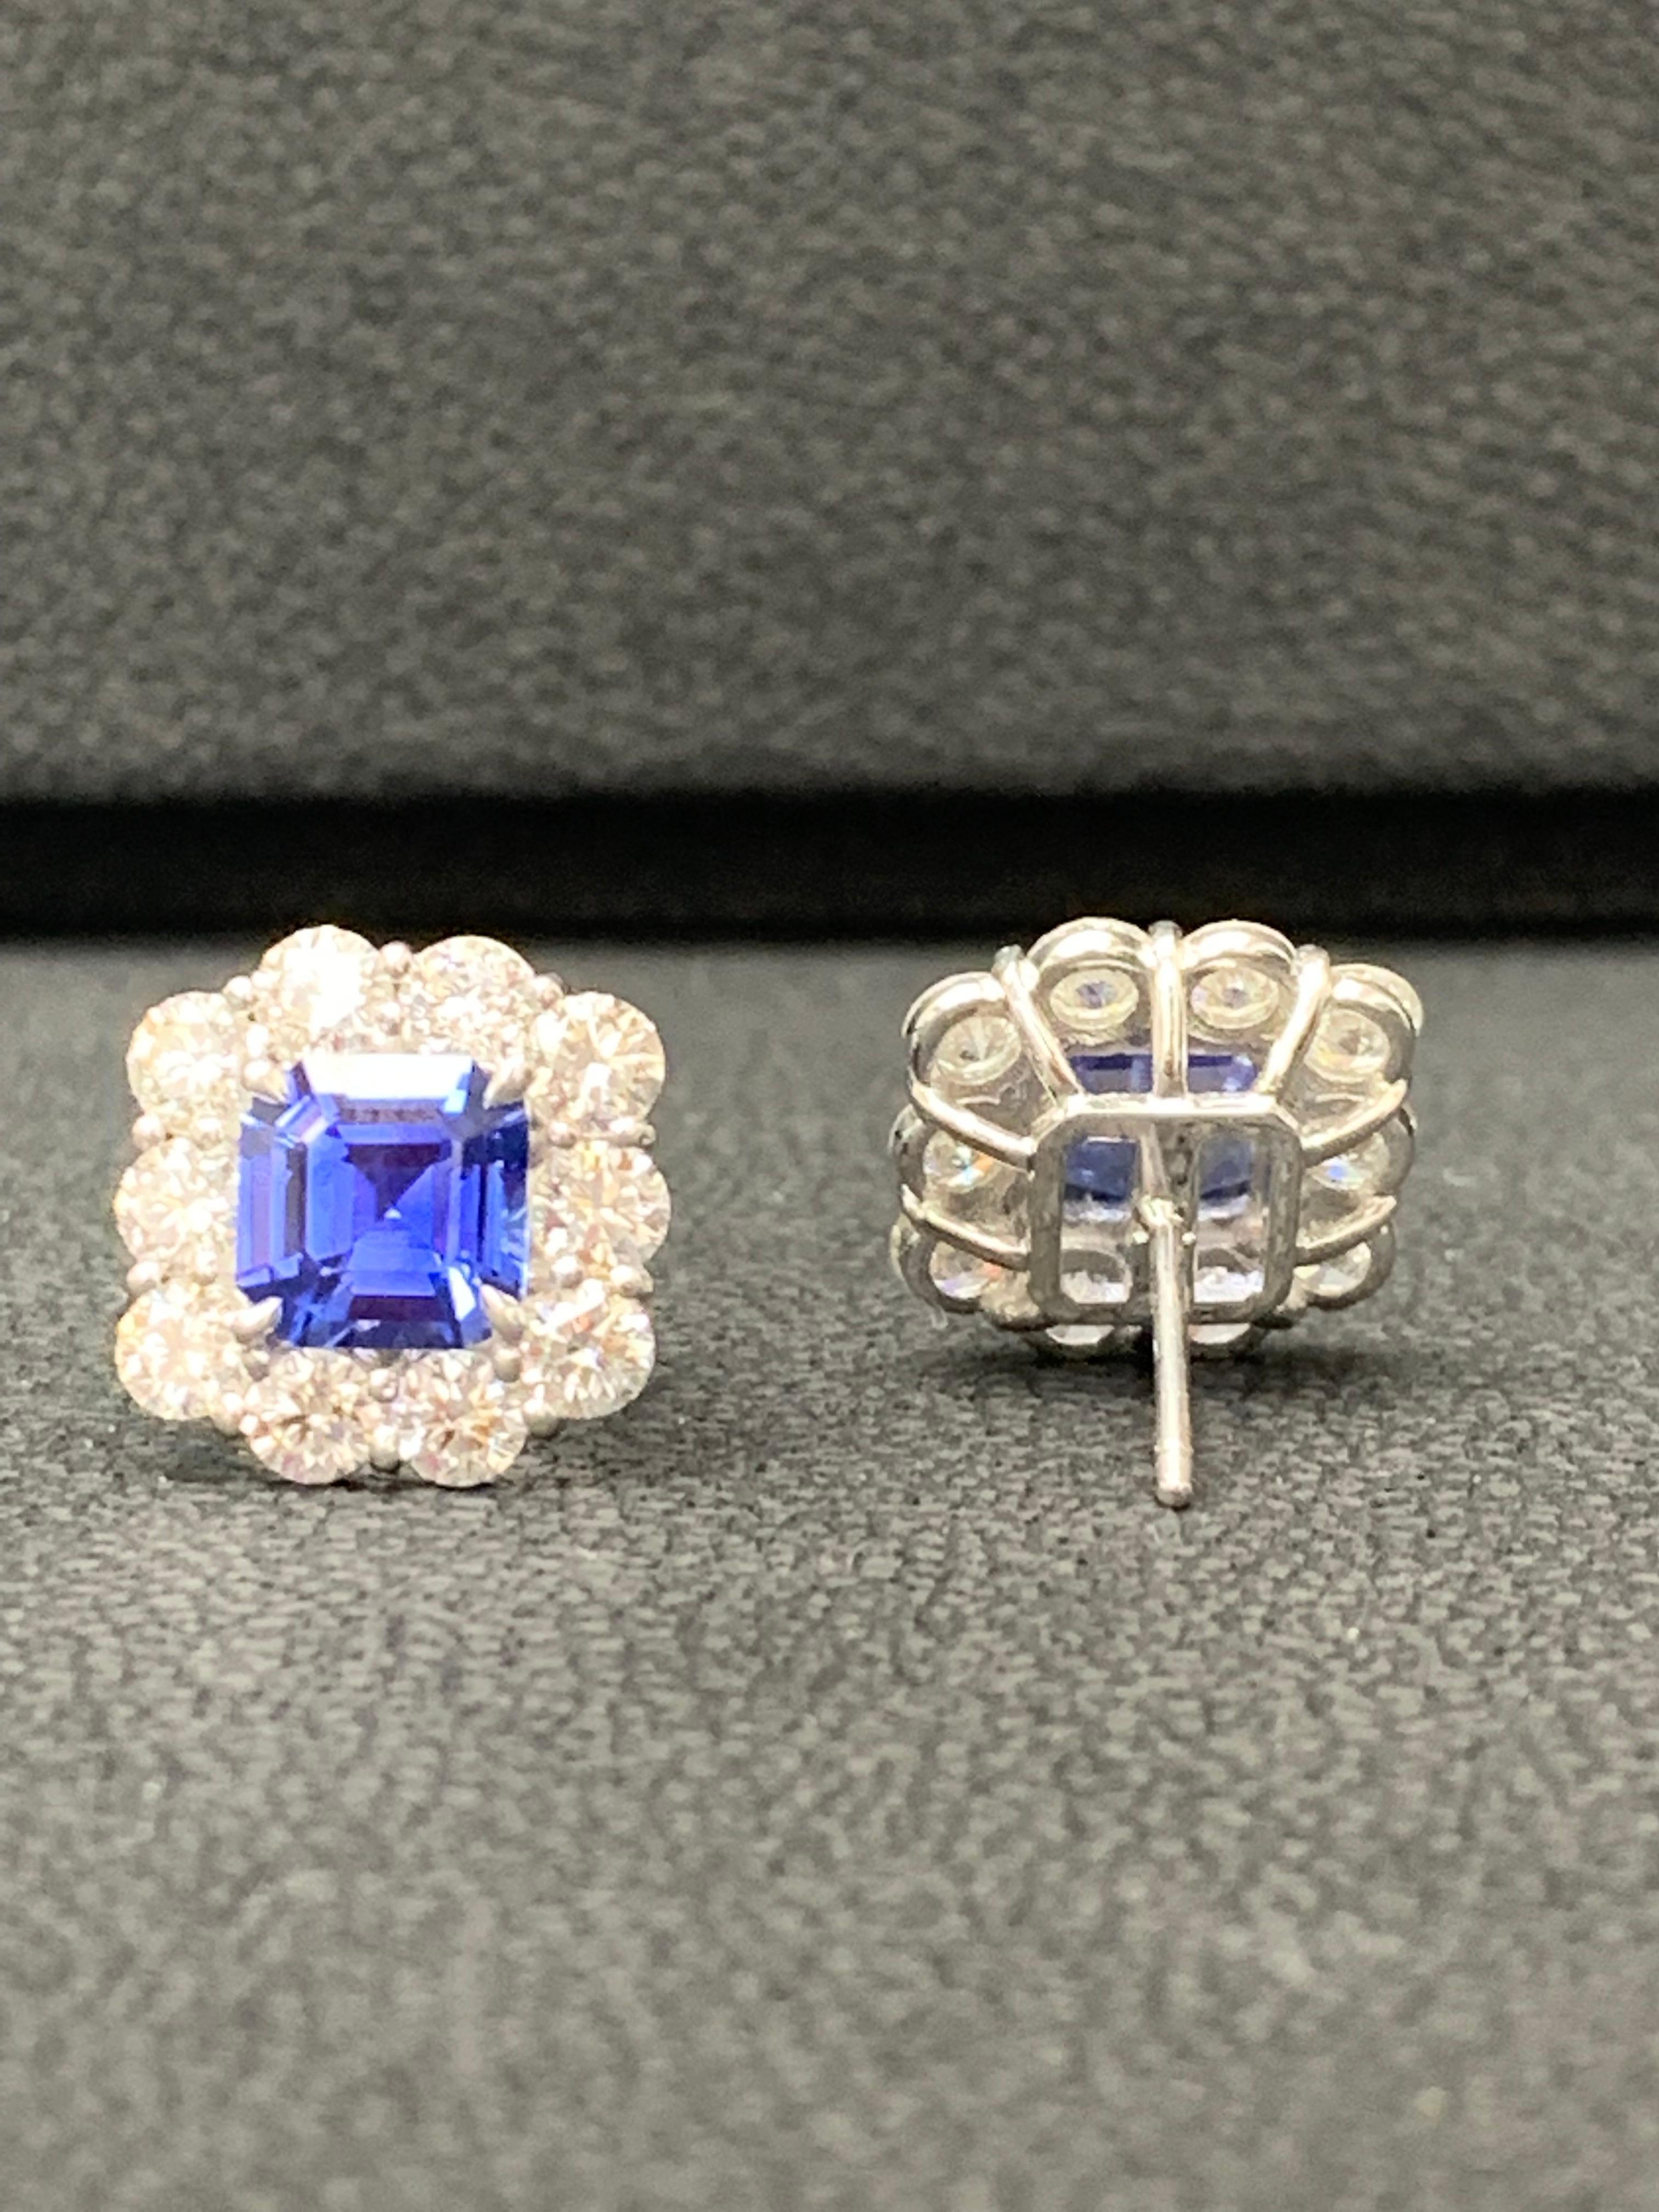 Men's 3.02 Carat Emerald Cut Blue Sapphire and Diamond Stud Earrings in 18K White Gold For Sale